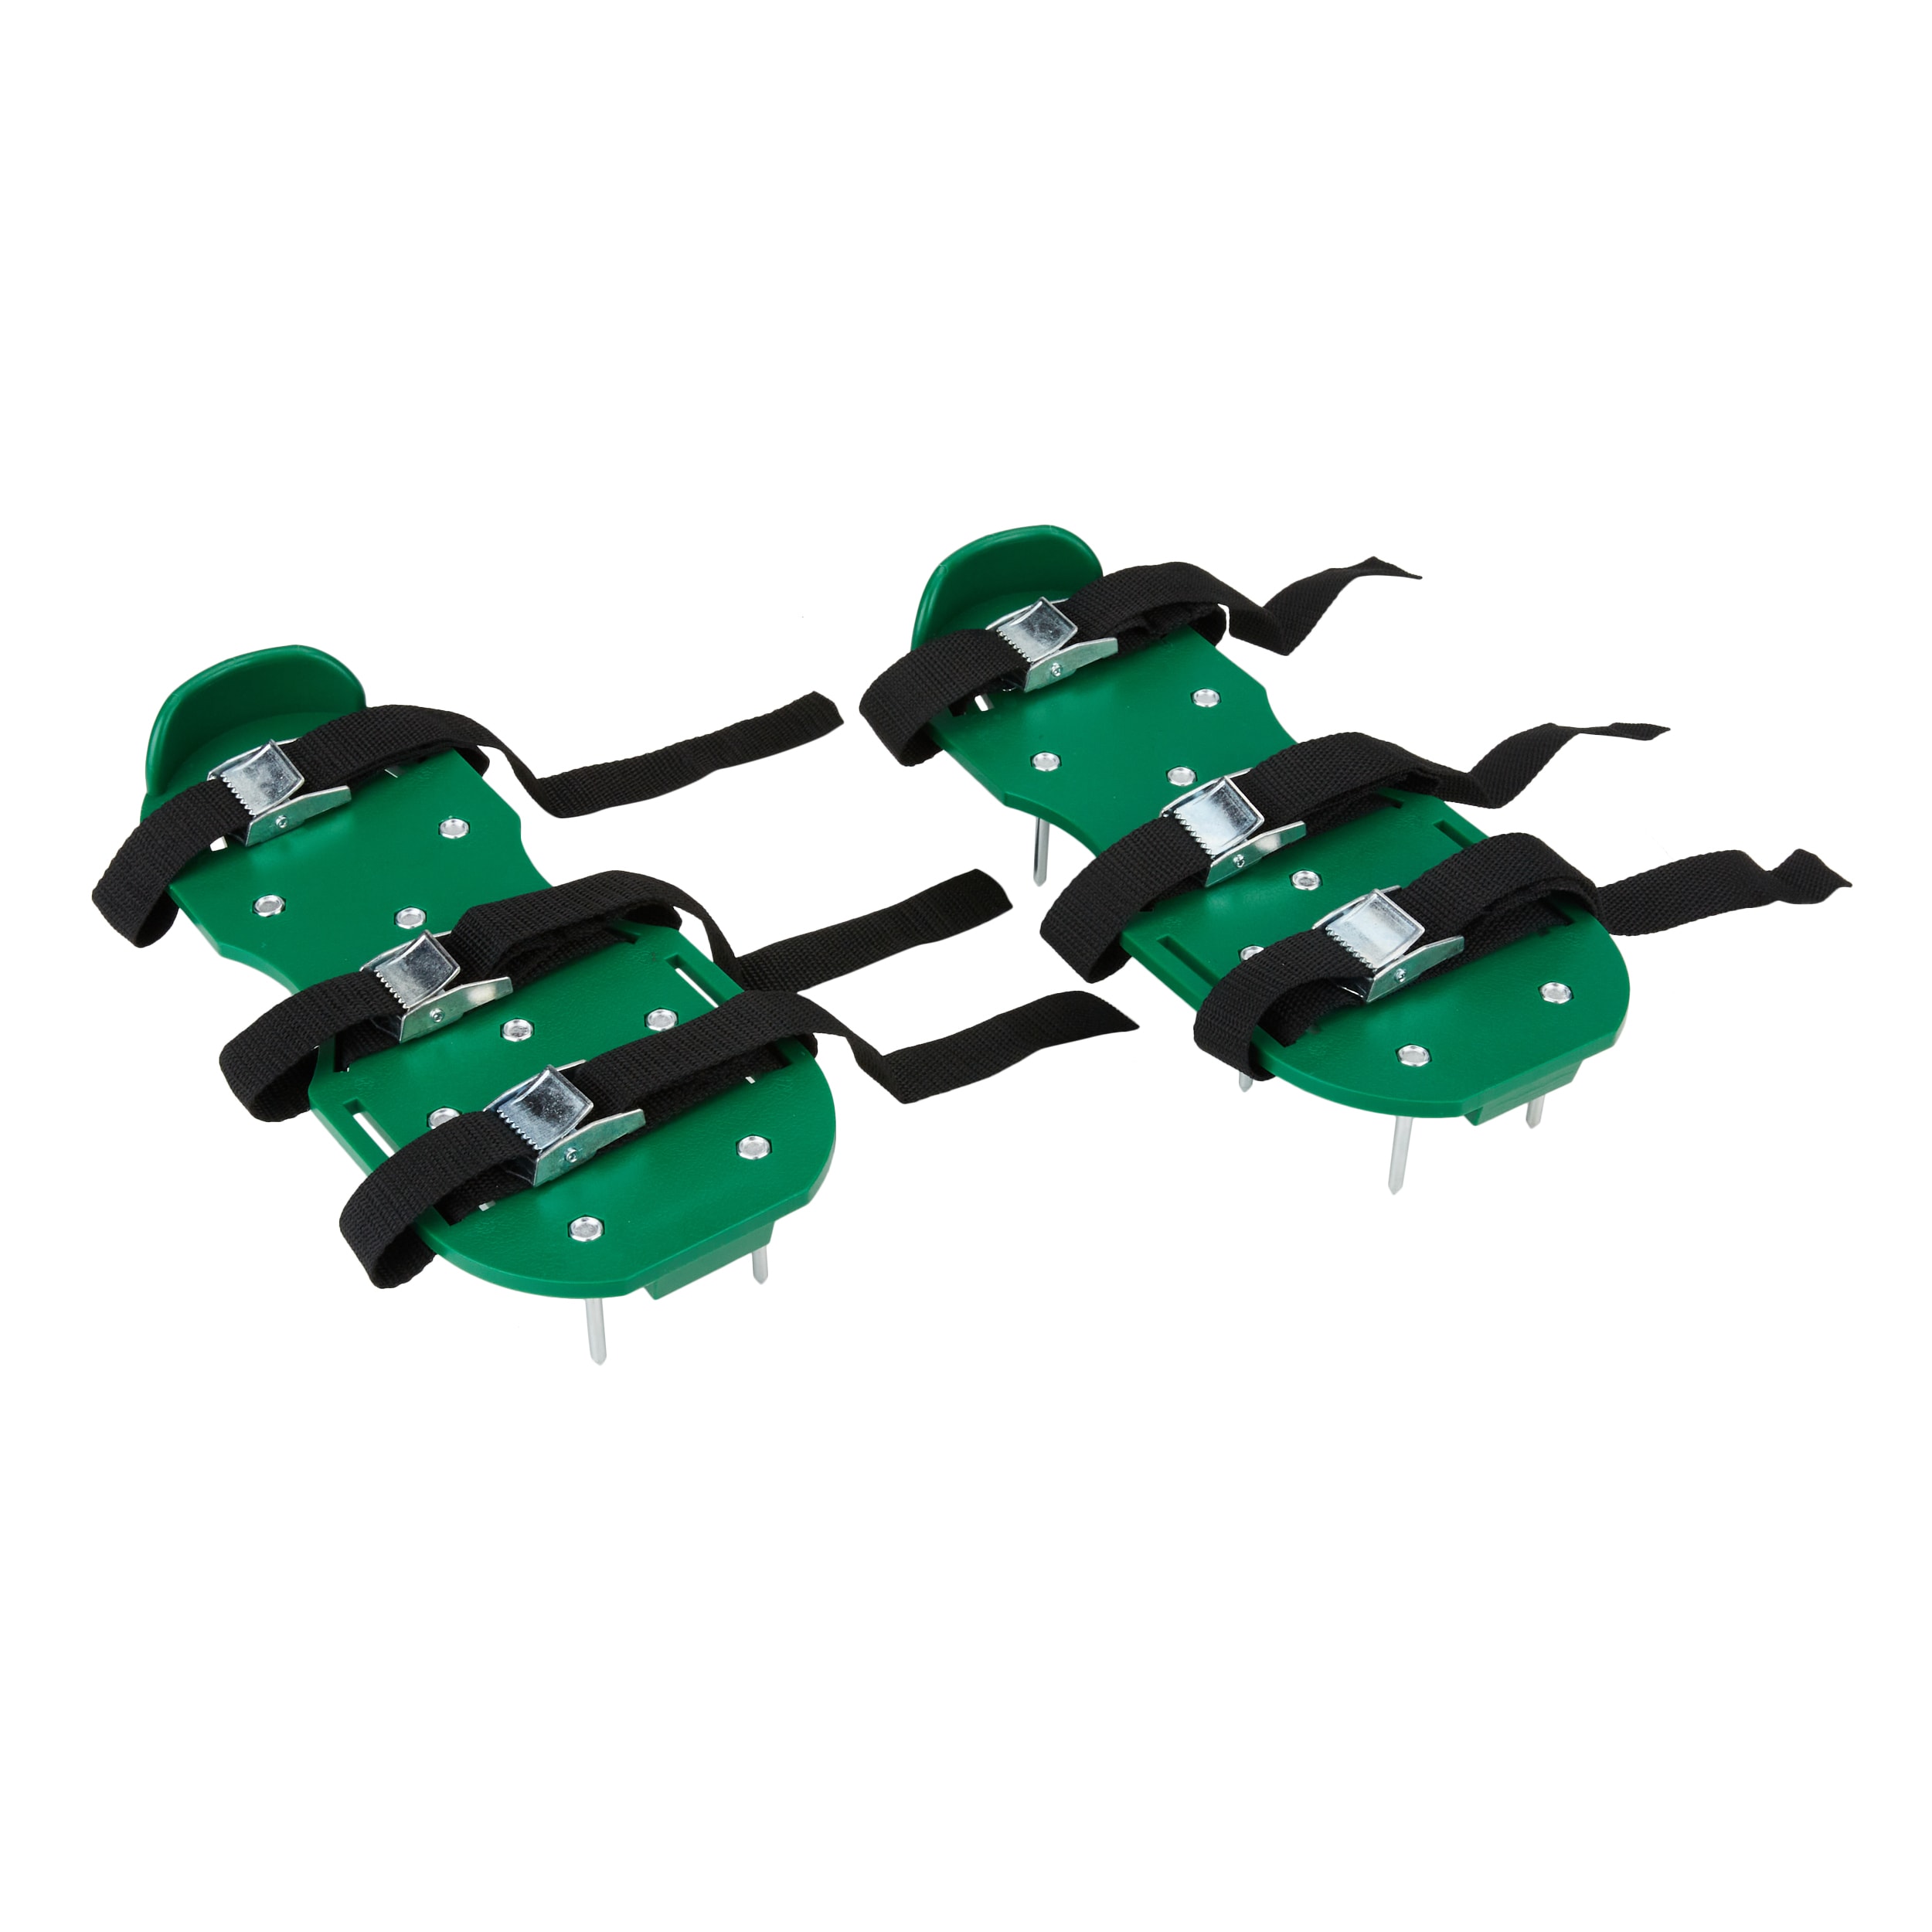 Envy Green Lawn Aerator Shoes Ready-to-Use Pre-Assembled One-Size-Fits-All Gardening Shoes Lawn Aerator with X-Strap Lawn Aerator Spike Shoes for